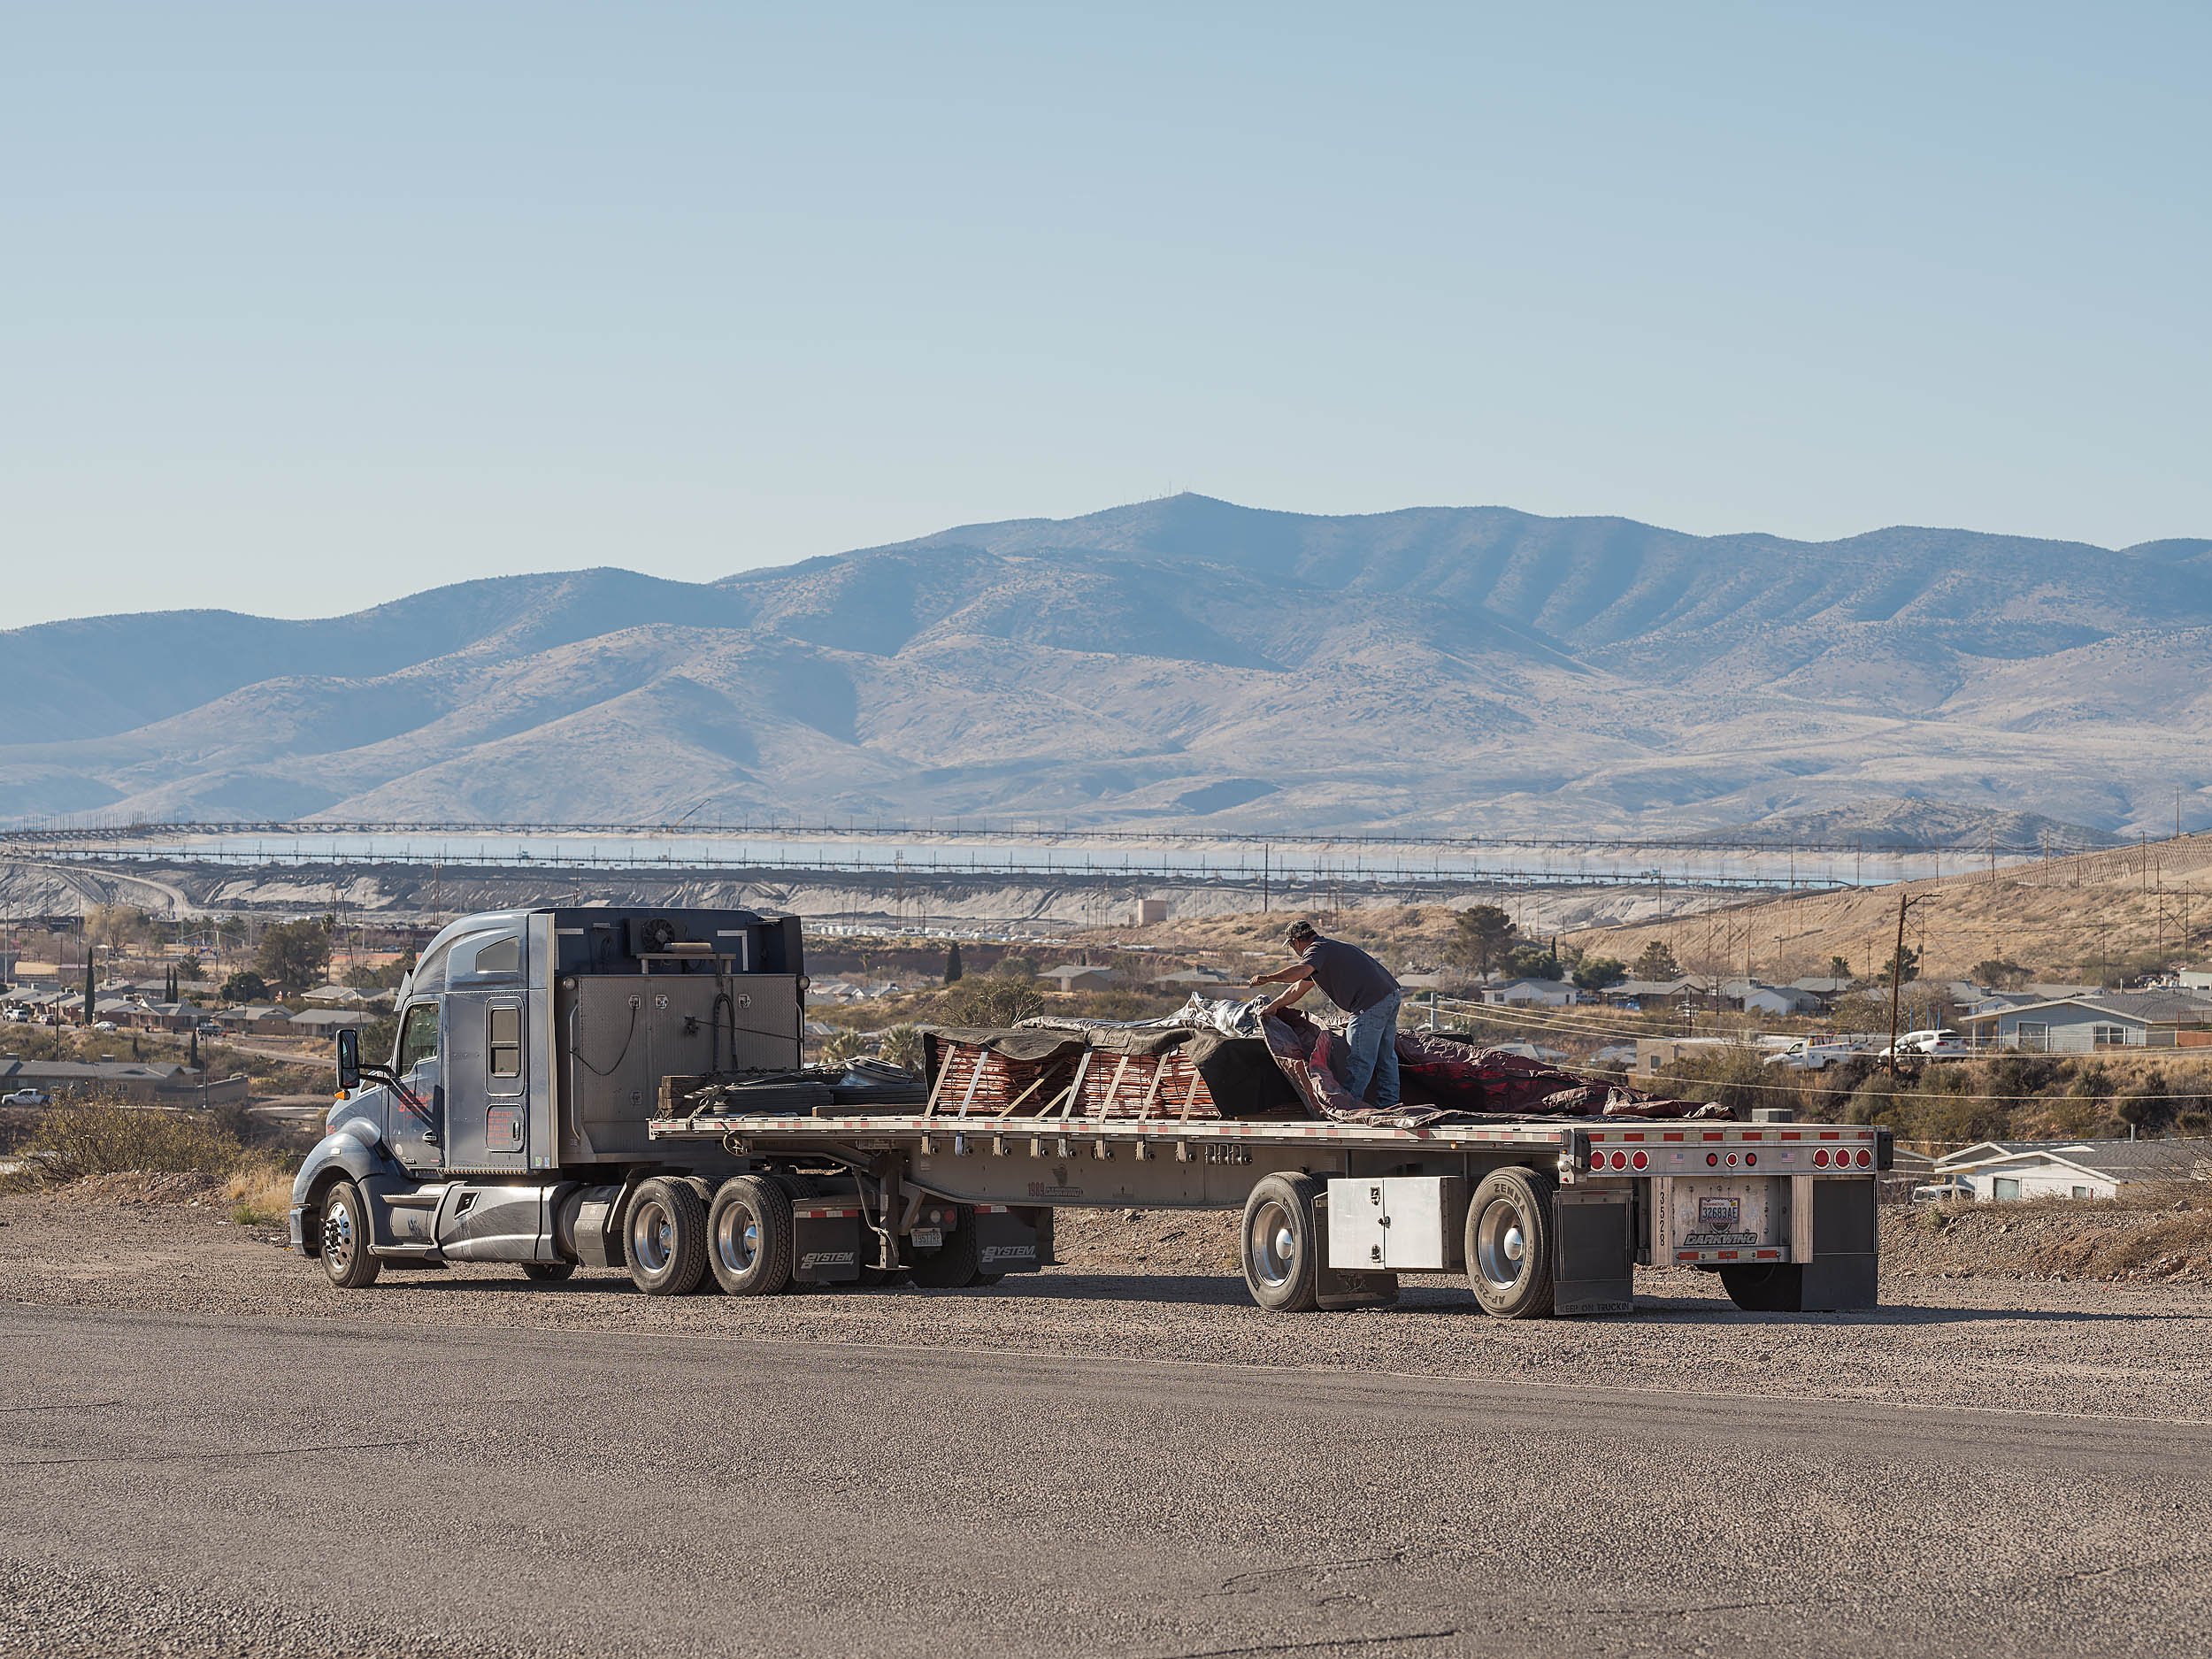 A typical load of copper cathodes being shipped out of the mine. Contracted truckers are instructed to cover the copper with tarps for security and driver safety. 